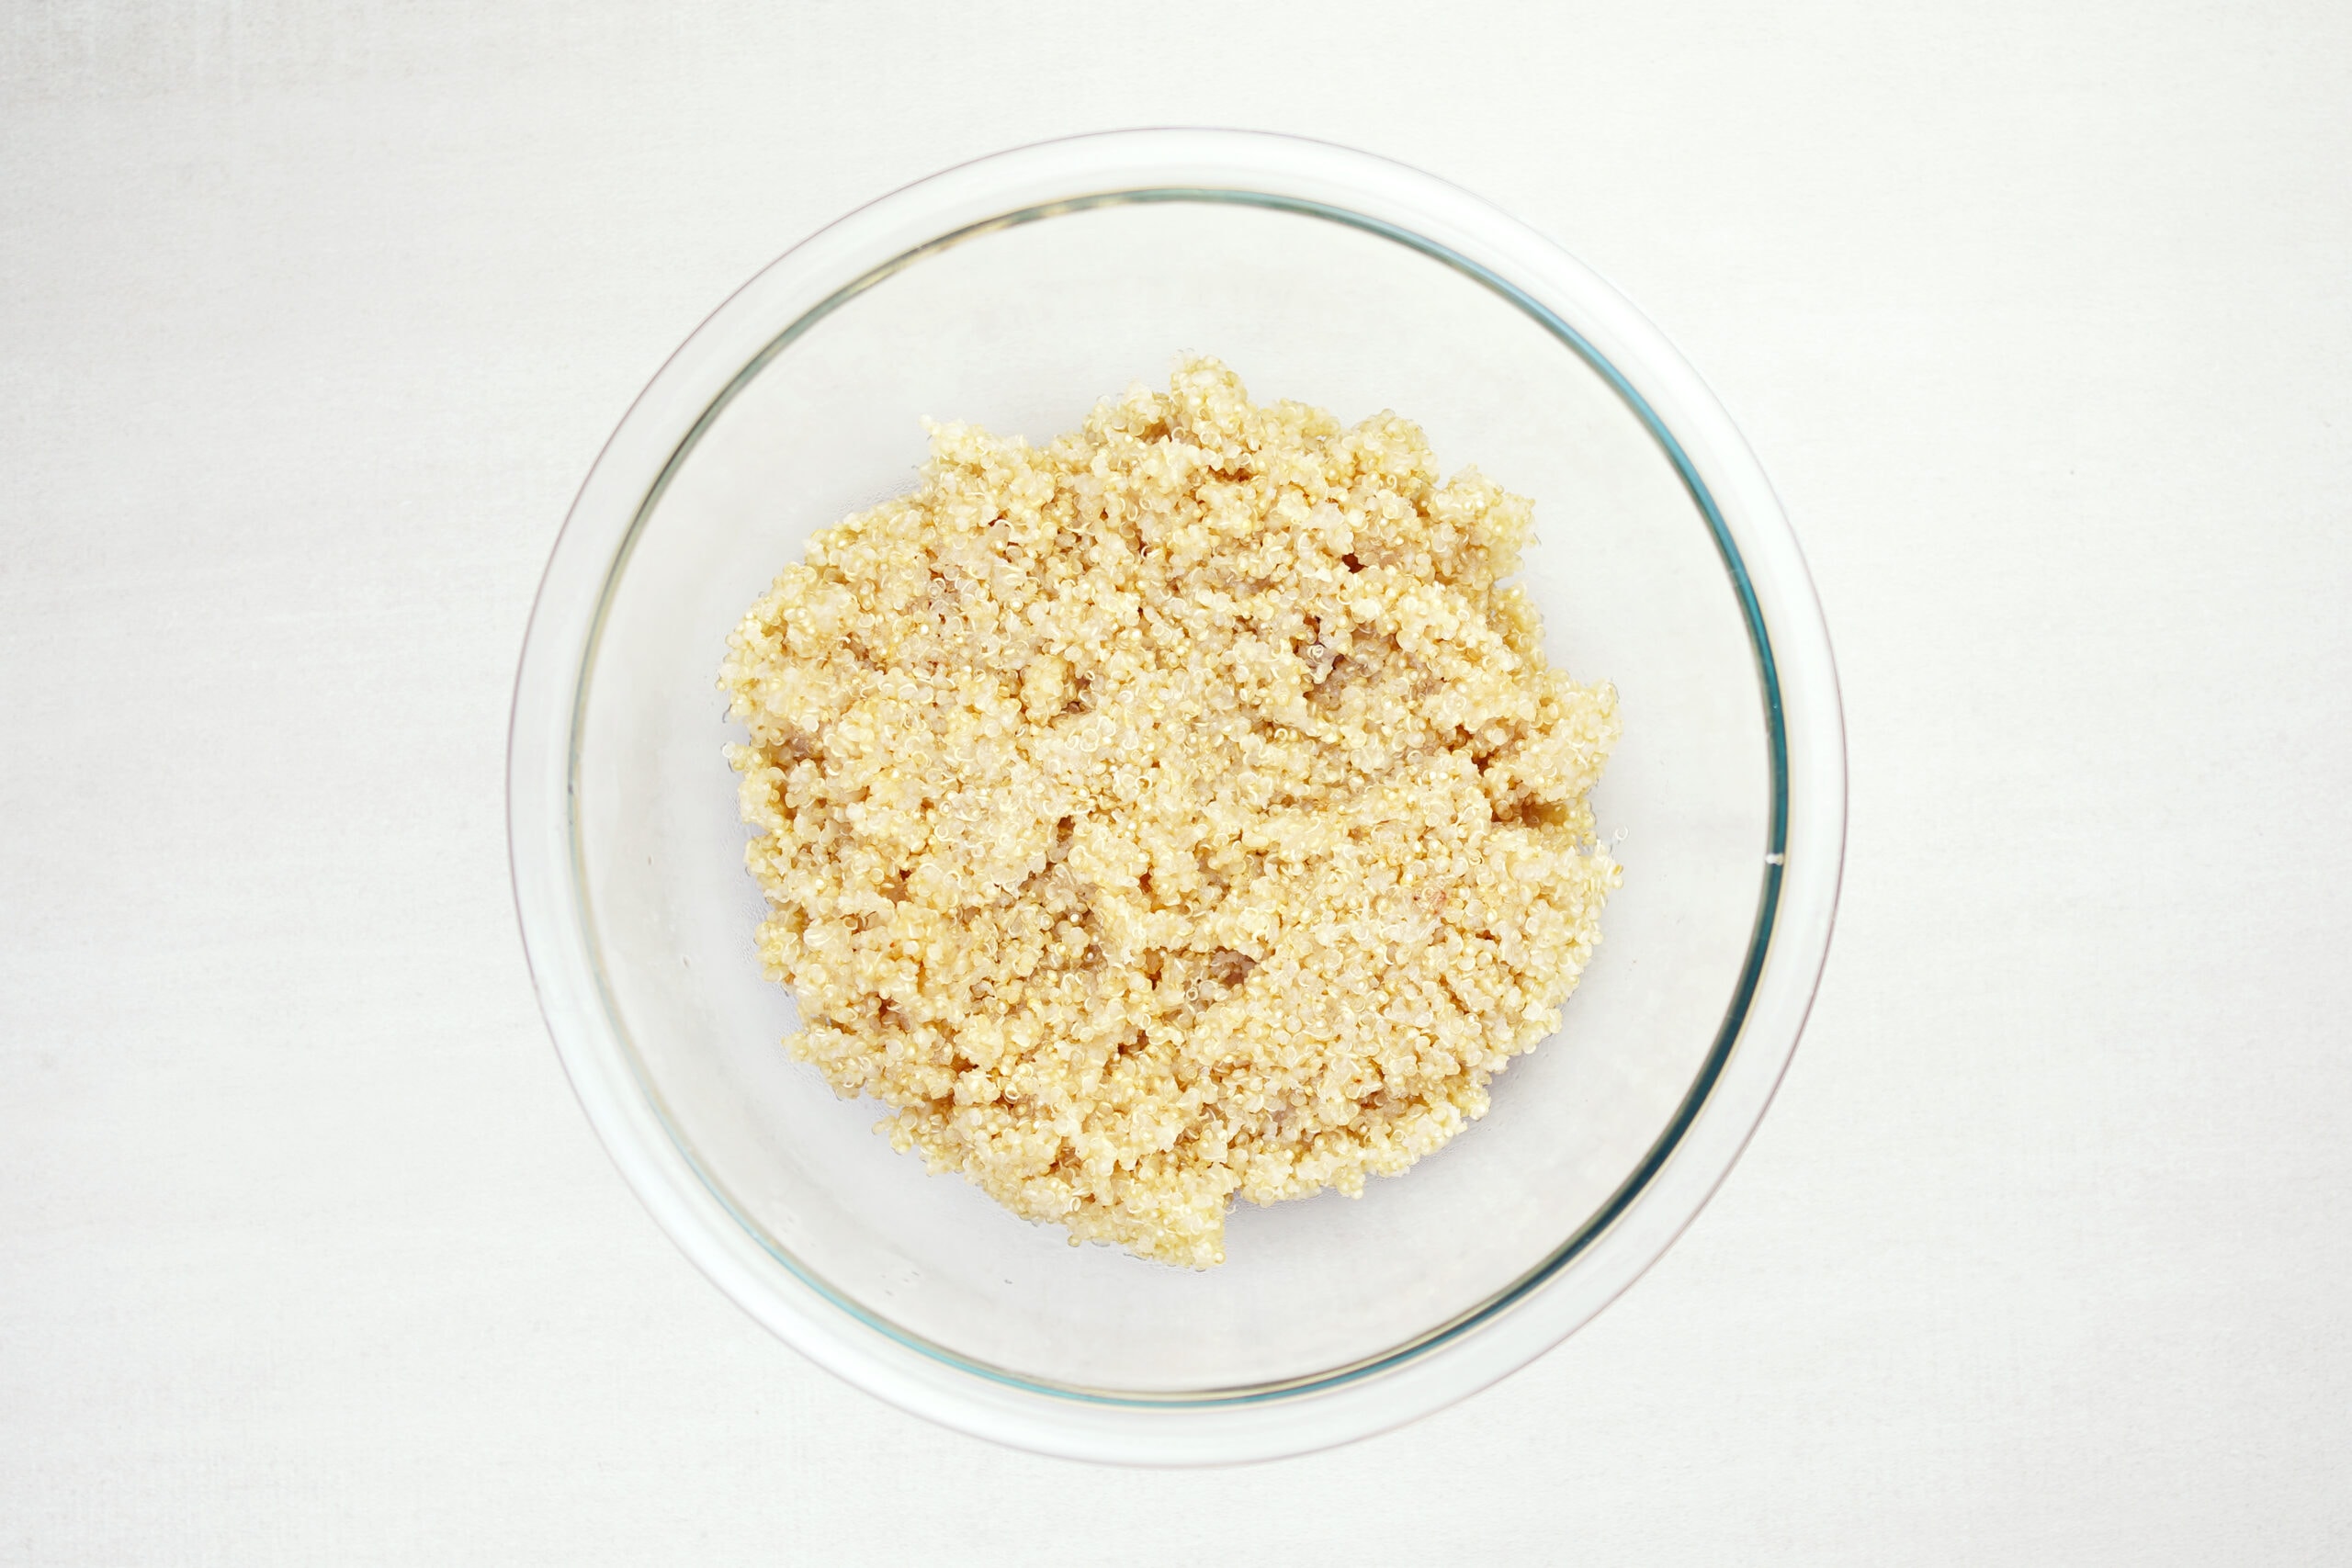 Cooked quinoa in a glass bowl.